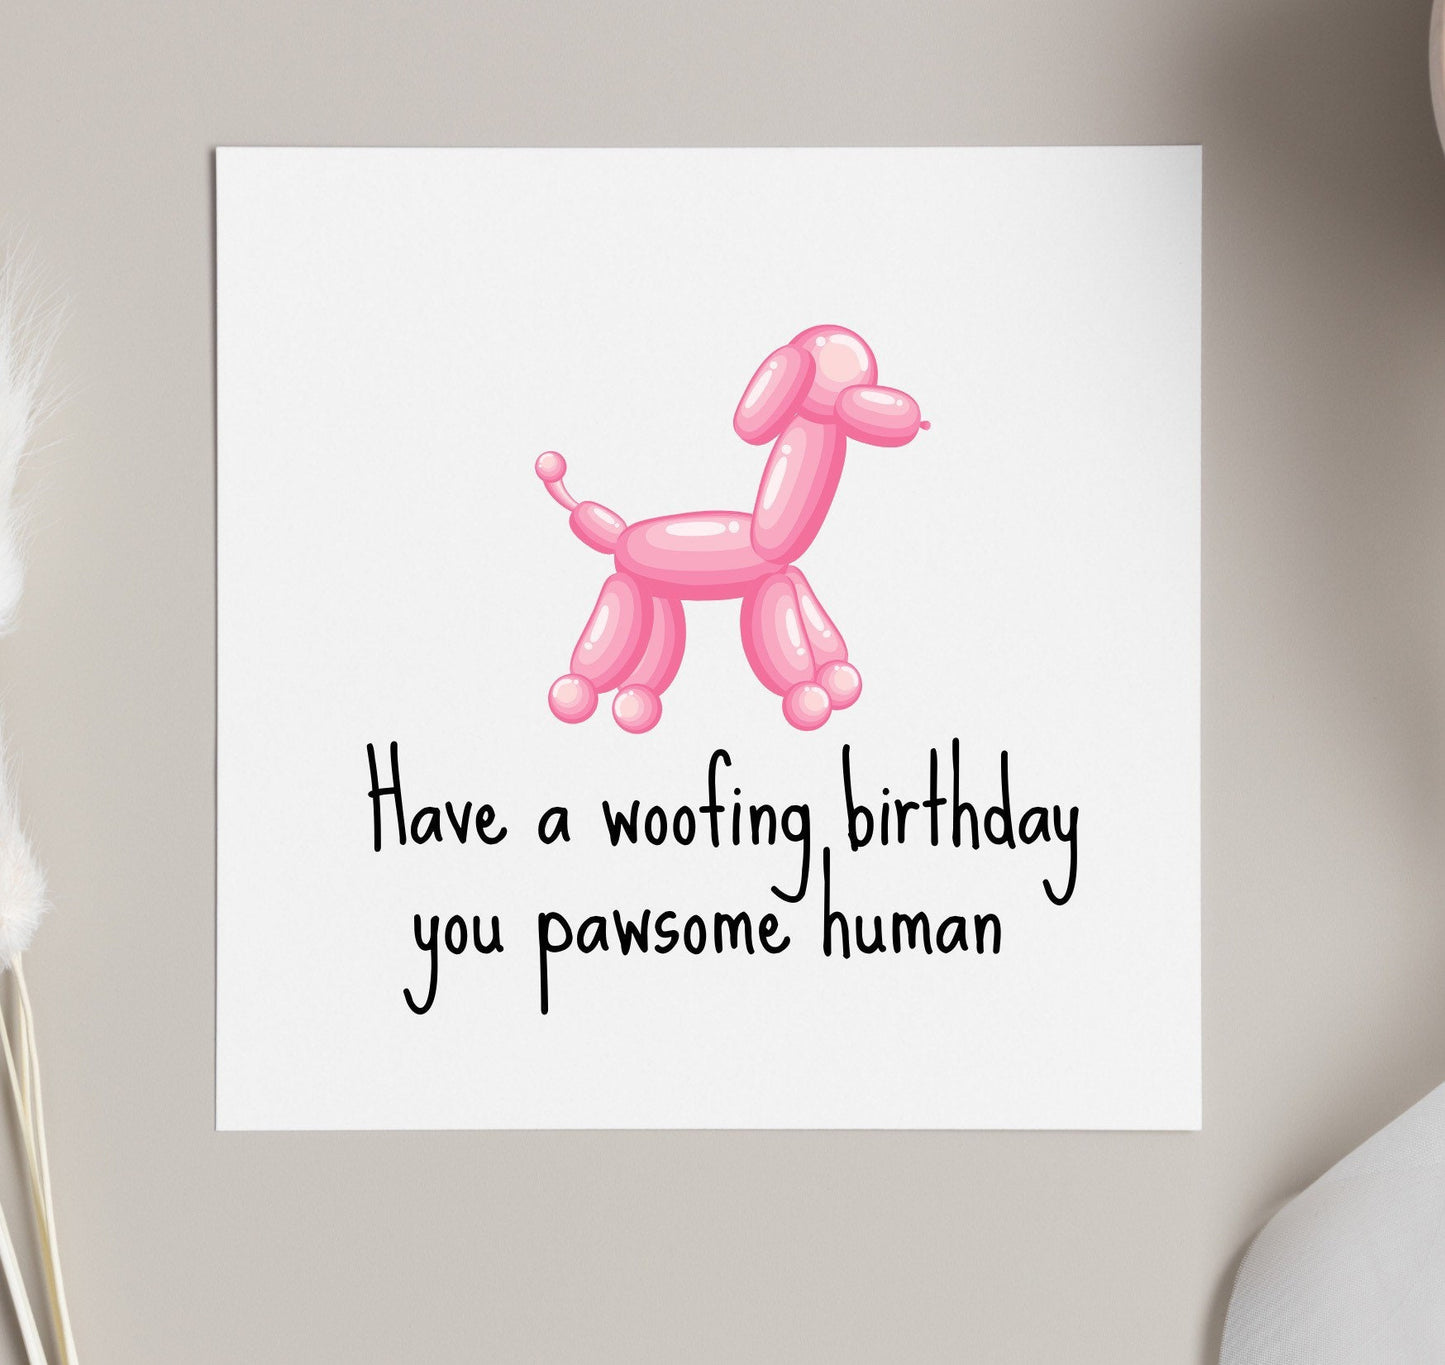 Have a woofing birthday you pawsome human, birthday cards from the dog, furry friend cards, card from fur baby, dog mum bday cards